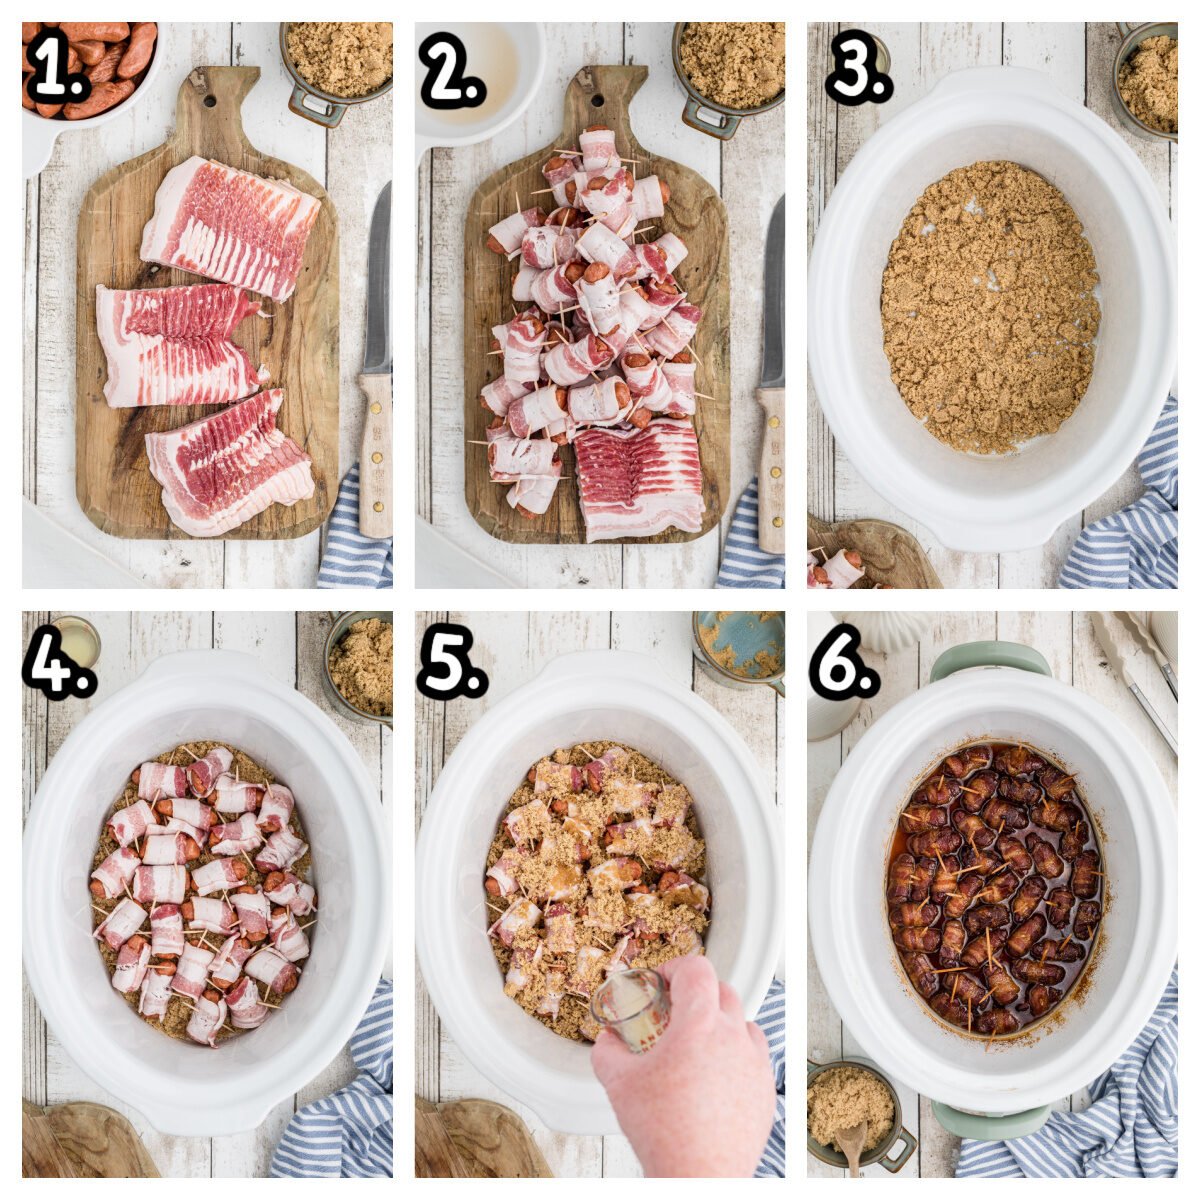 6 images showing how to make bacon wrapped smokies in a crockpot.